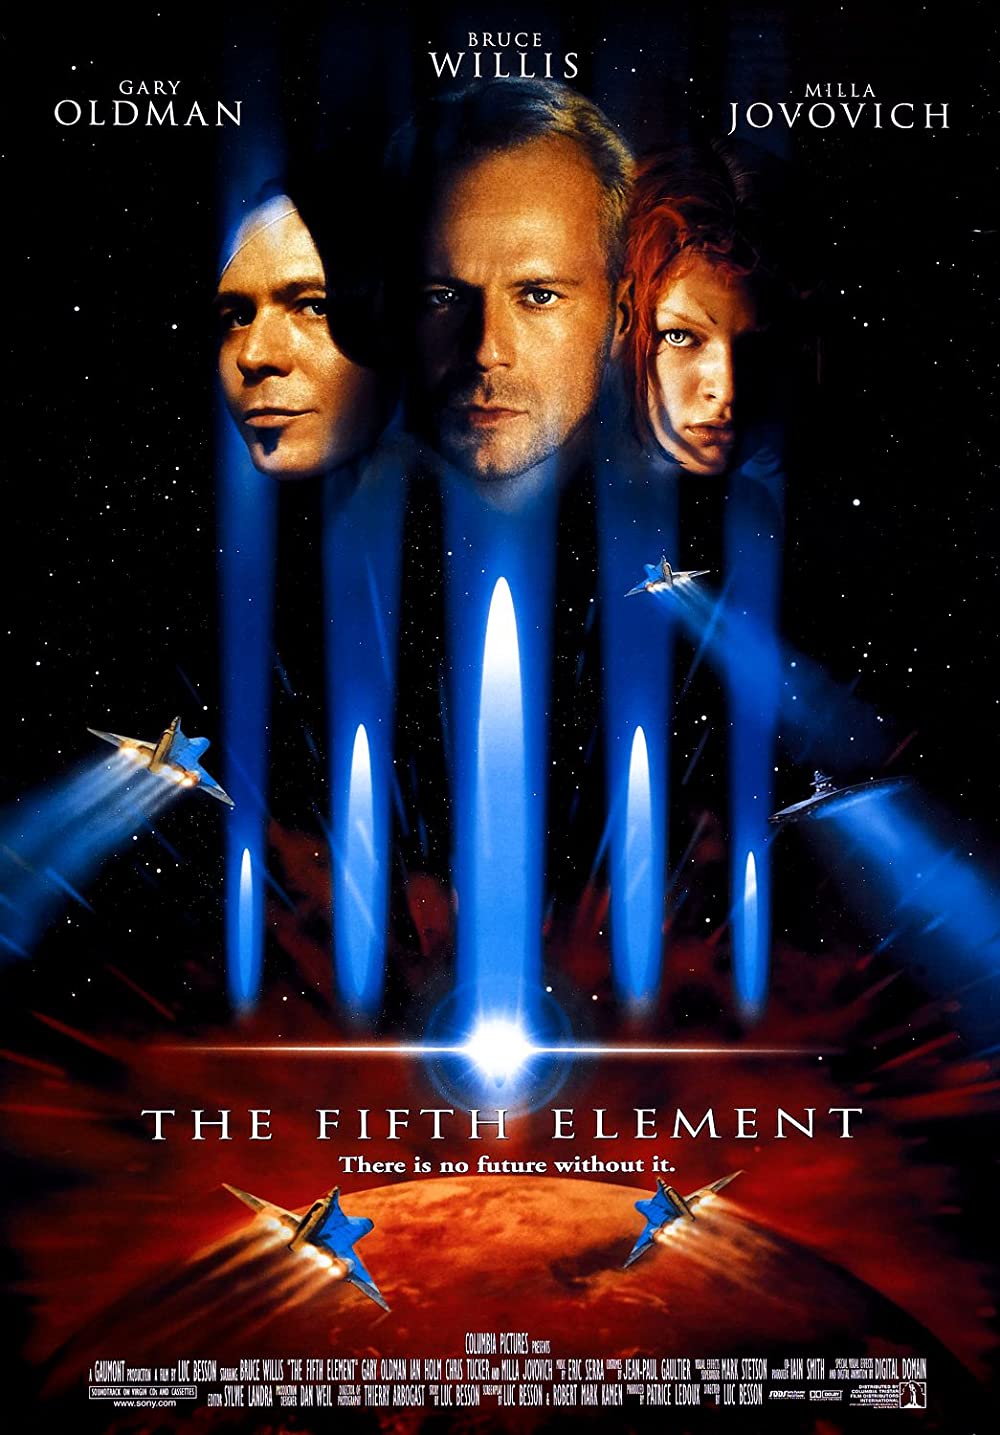 FULL MOVIE: The Fifth Element (1997) [Action]